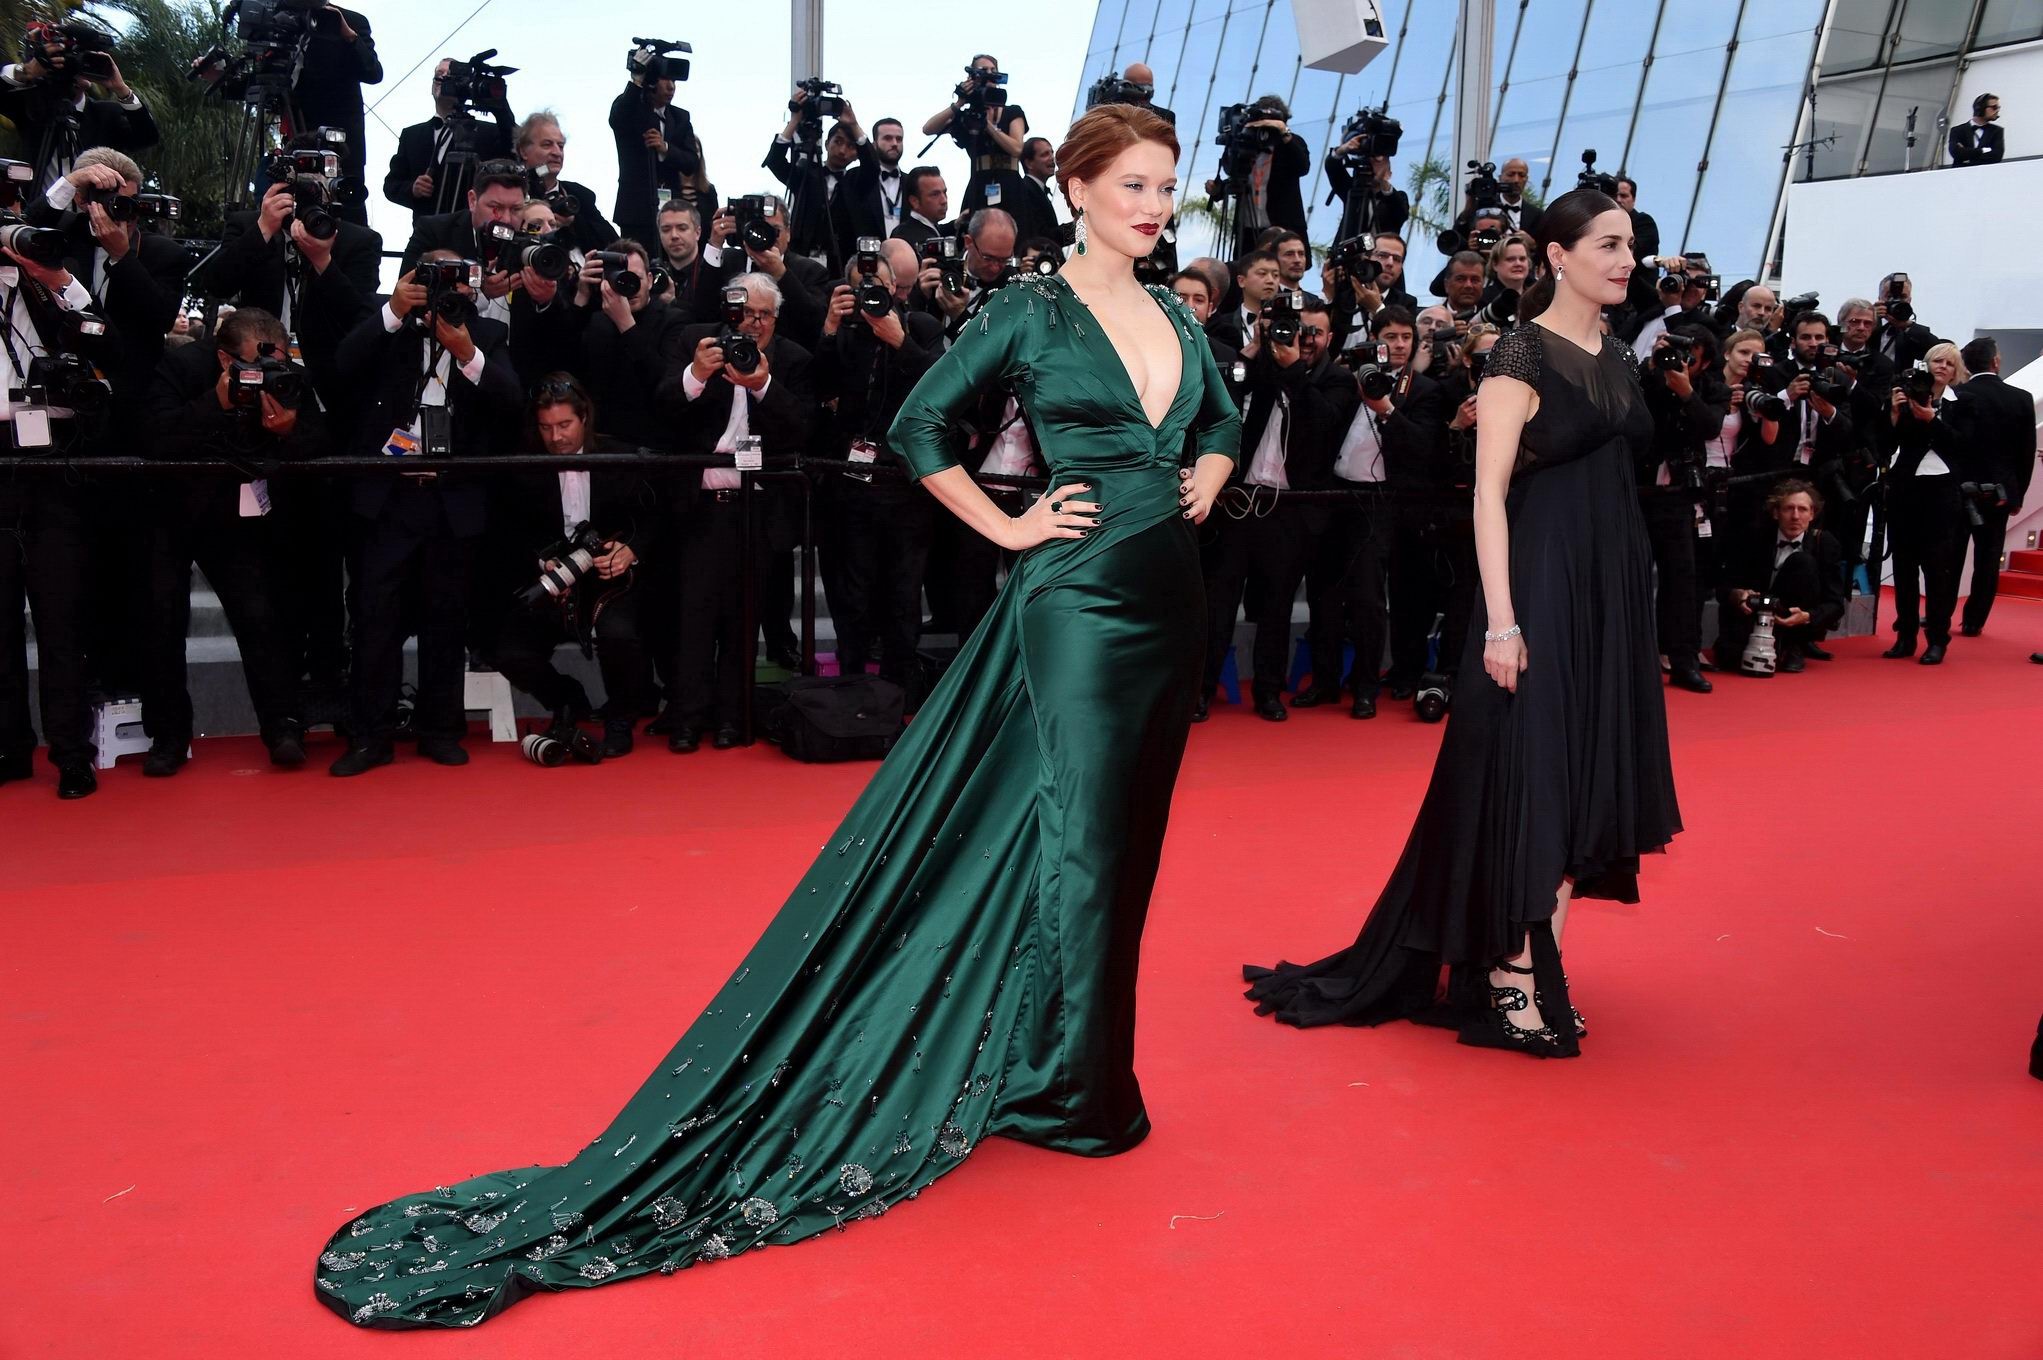 Lea Seydoux showing huge cleavage at the Saint Laurent premiere in Cannes #75195851